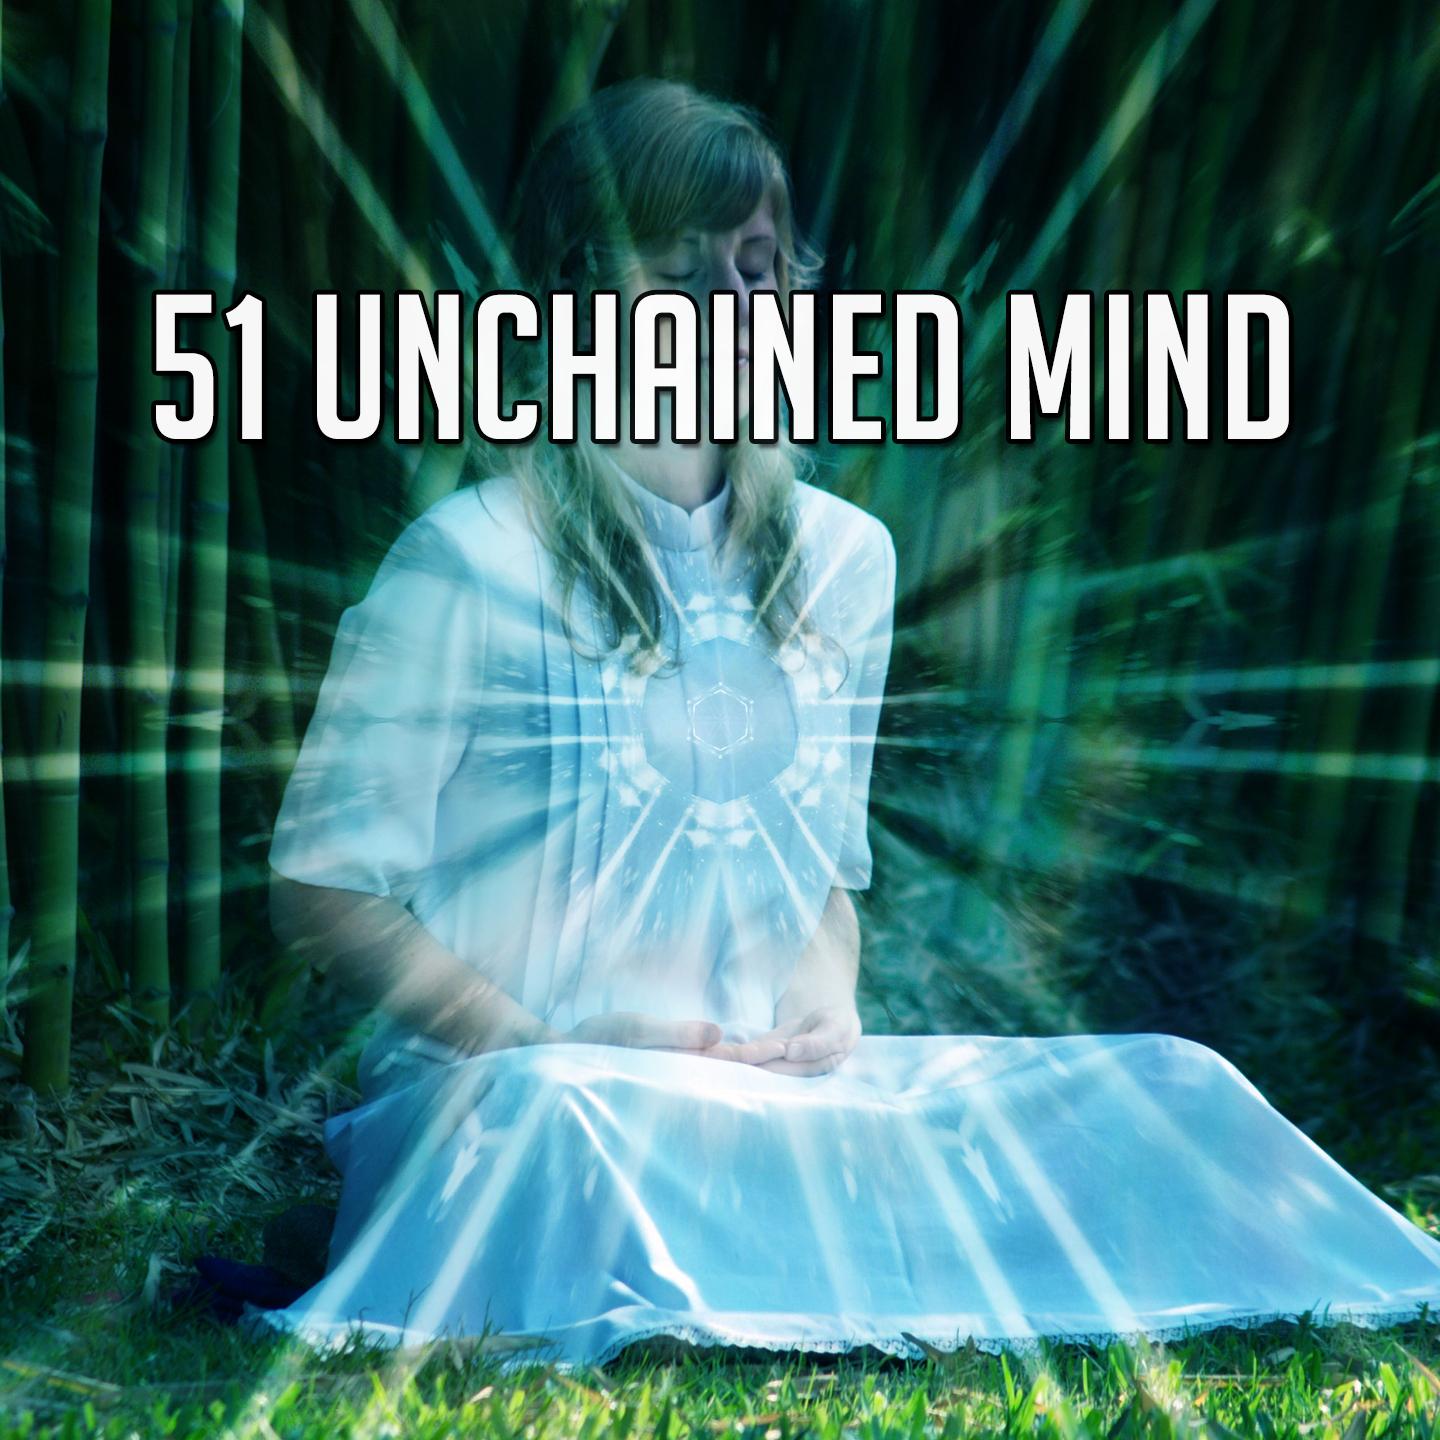 51 Unchained Mind